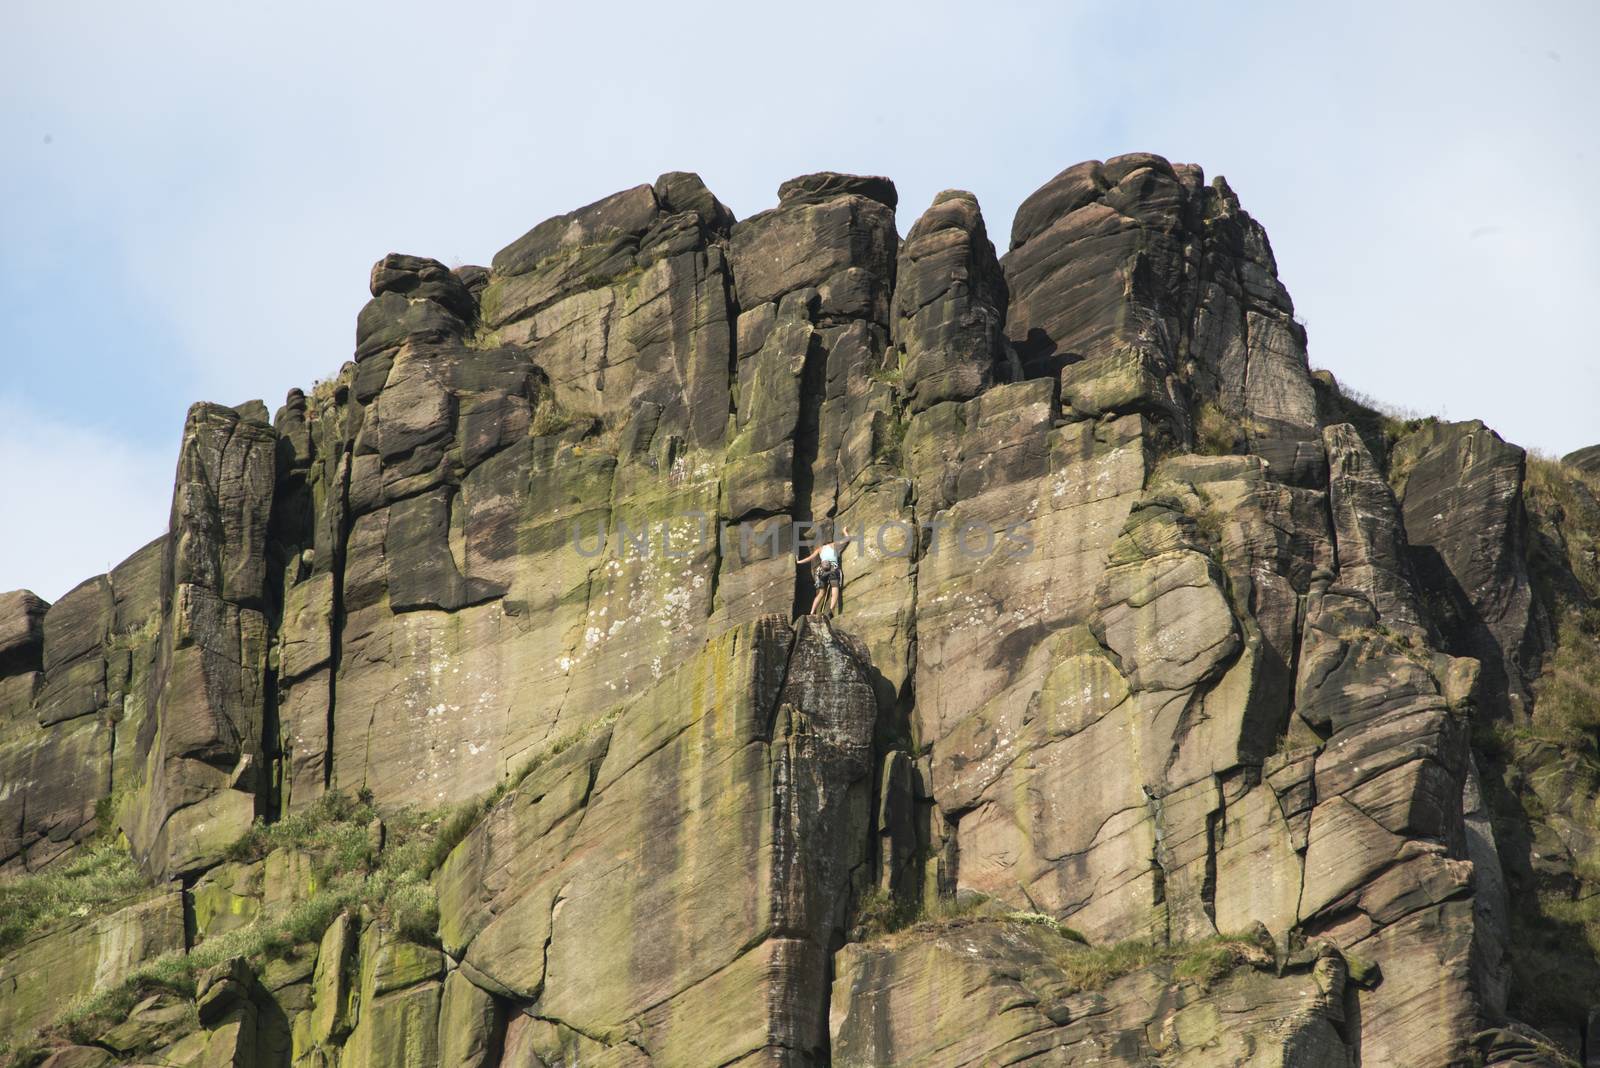 Close up of the climbing destination, the Roaches, Staffordshire